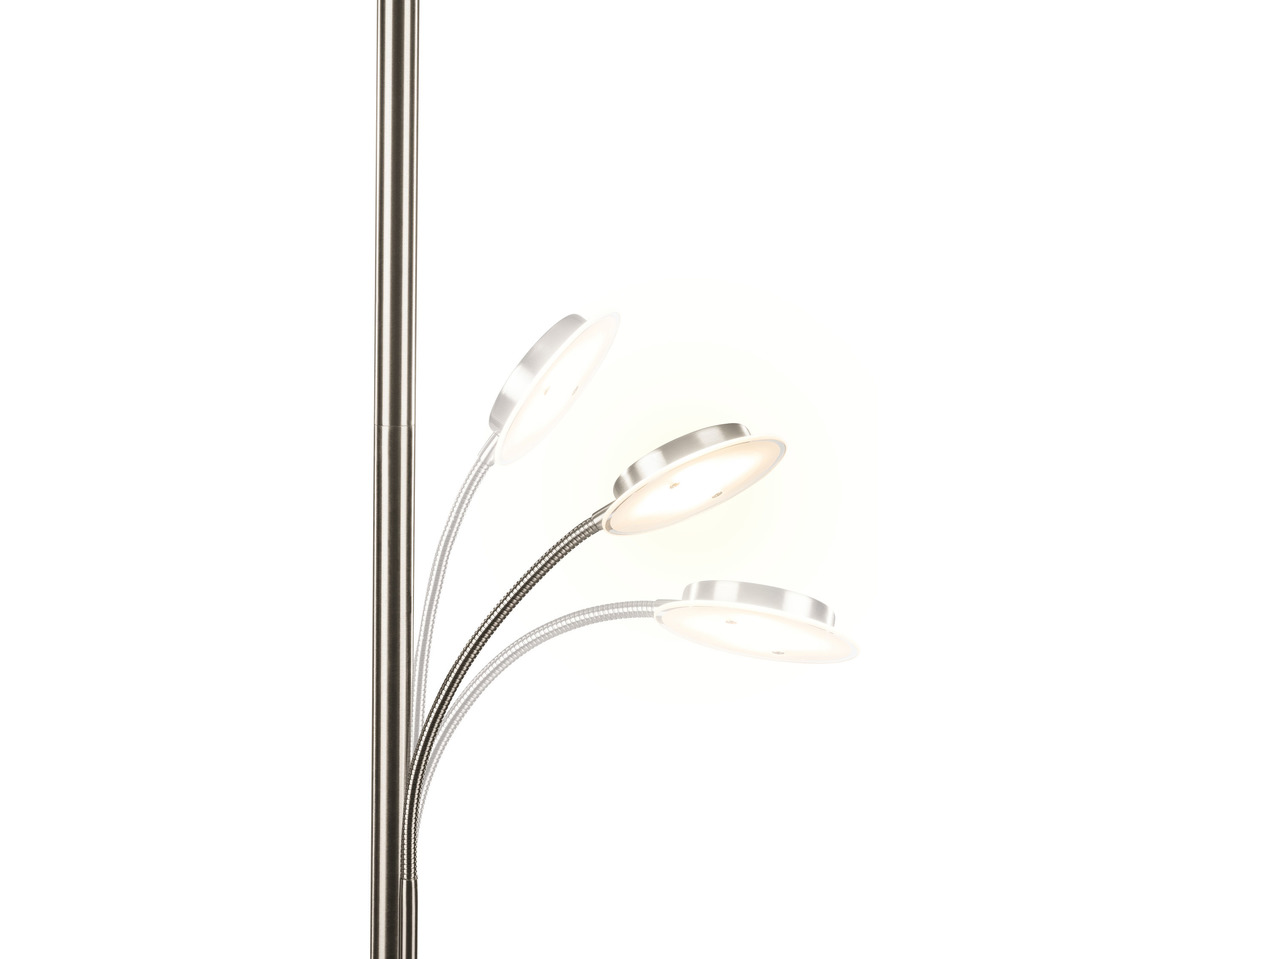 Livarno Lux Father and Child Uplighter LED Floor Lamp